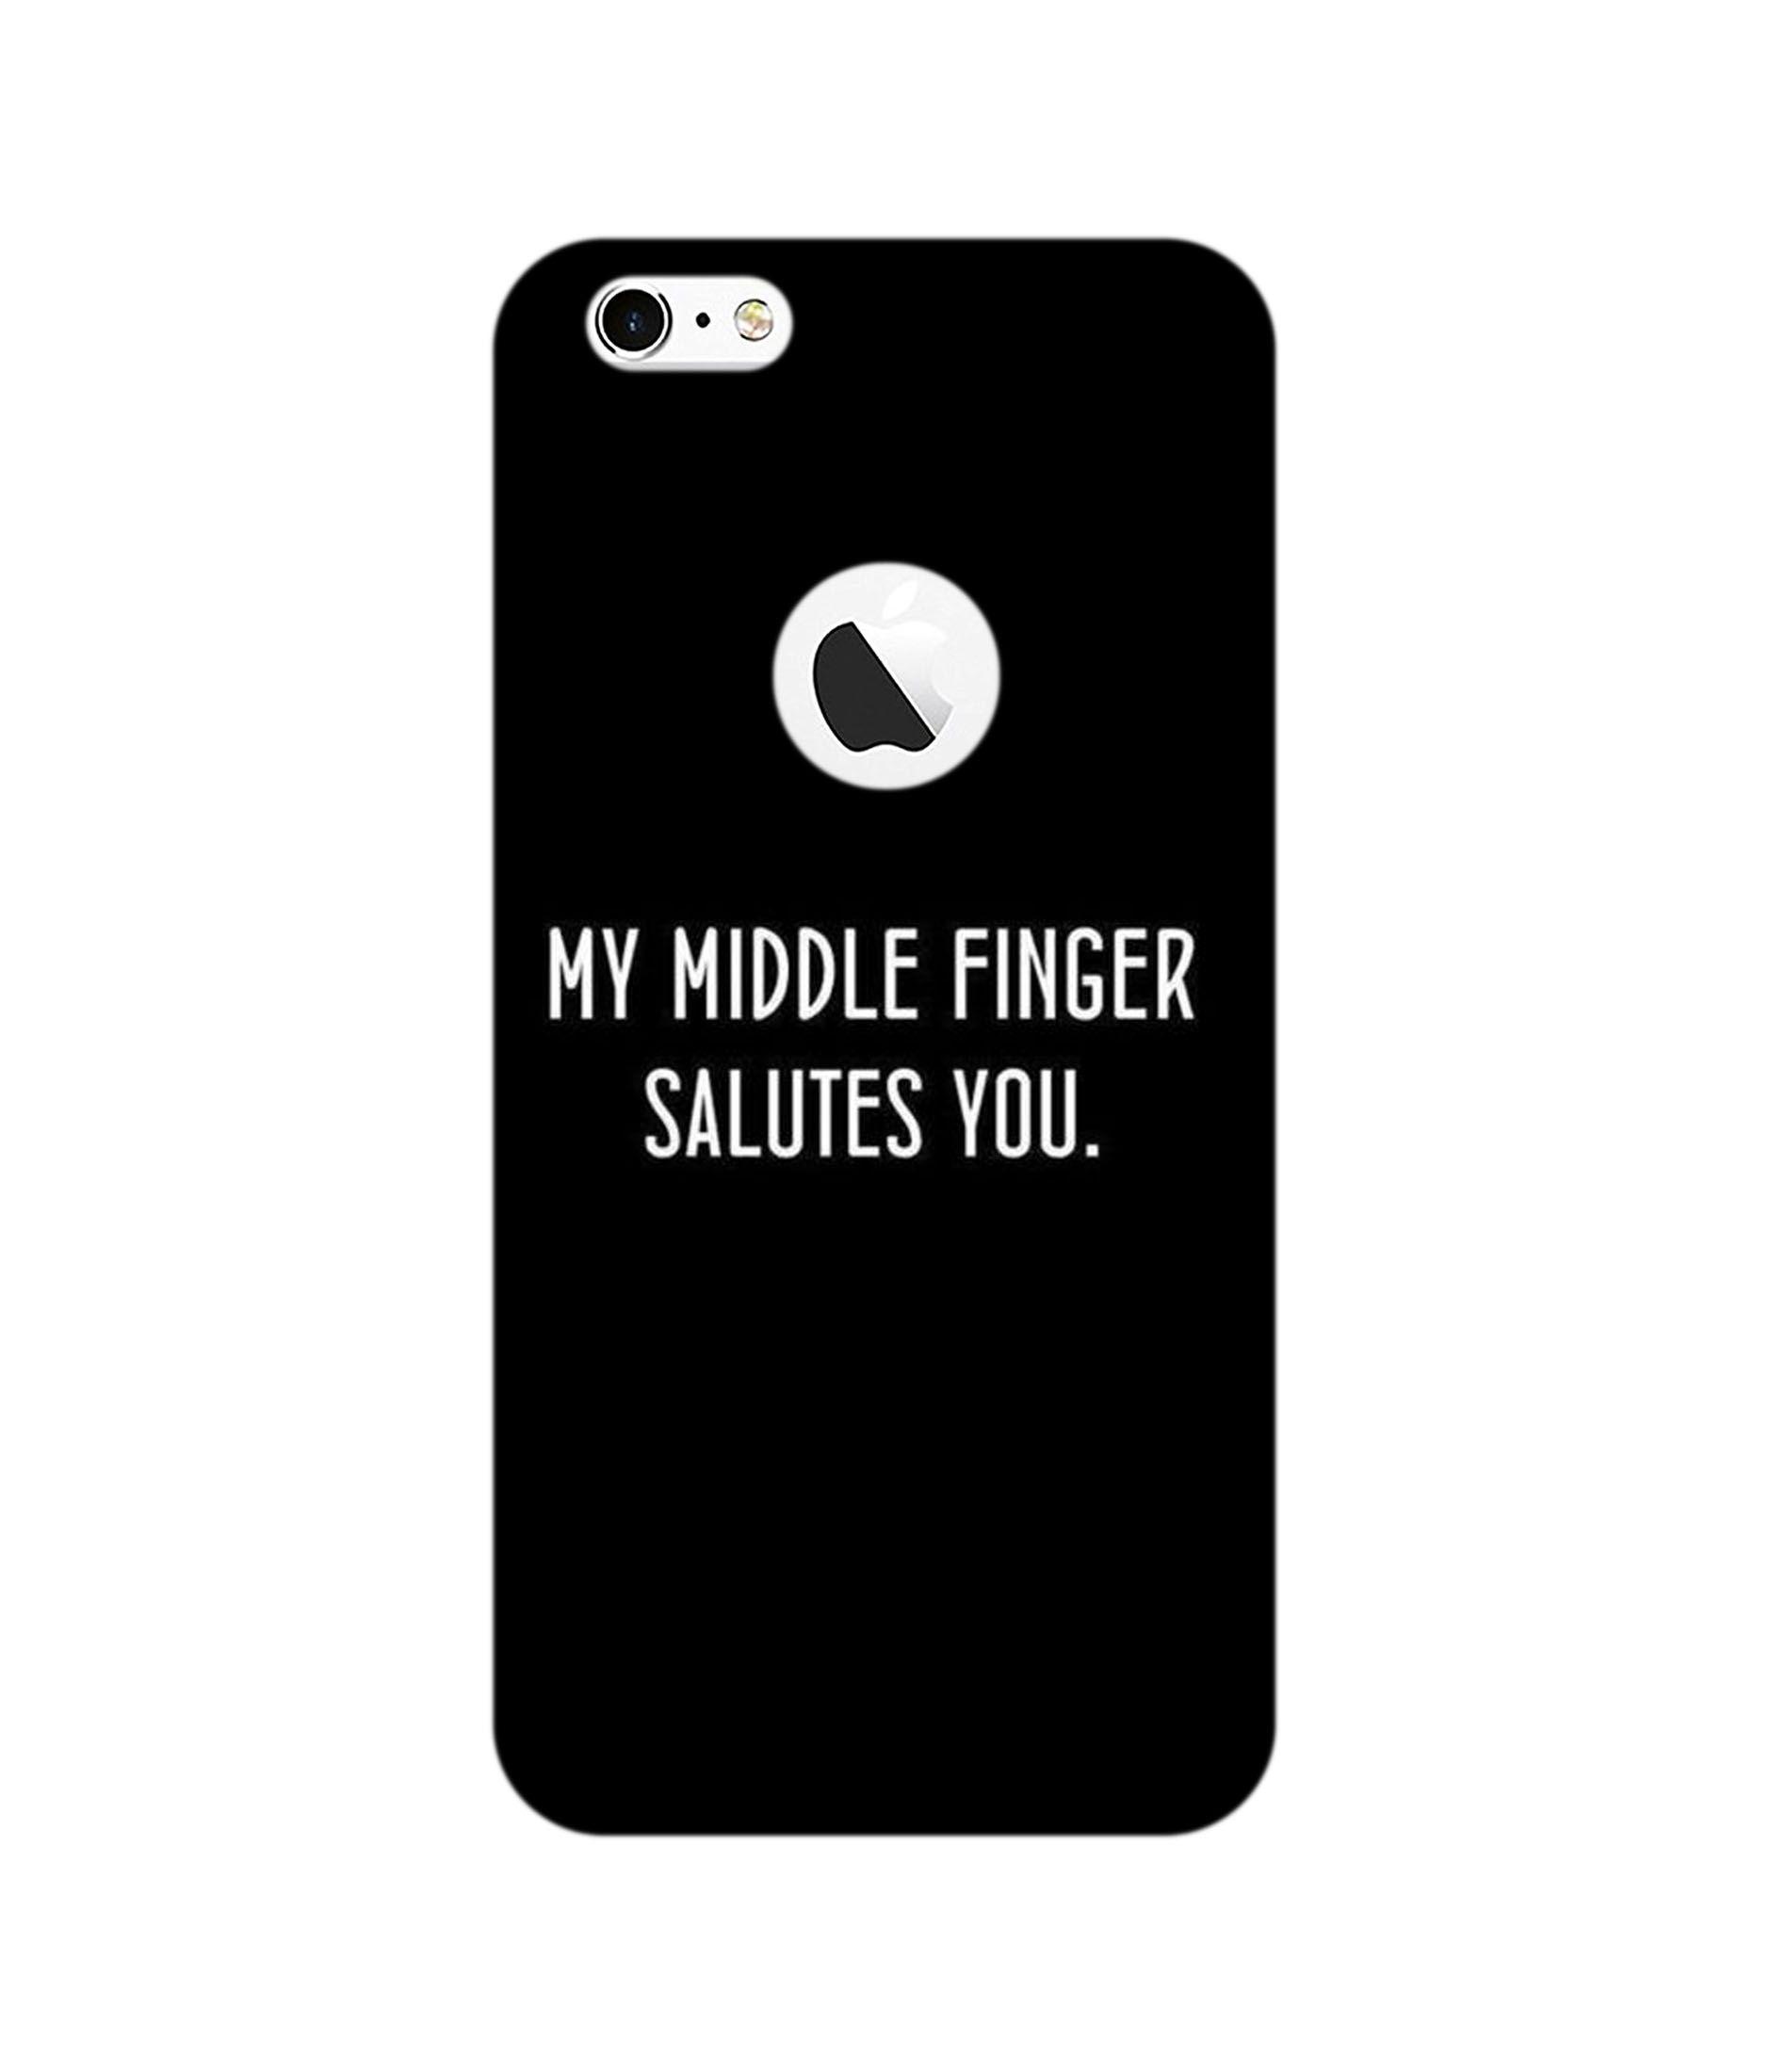 6s Logo - My Middle Finger Phone Case For IPhone 6 6s (Logo Cut)